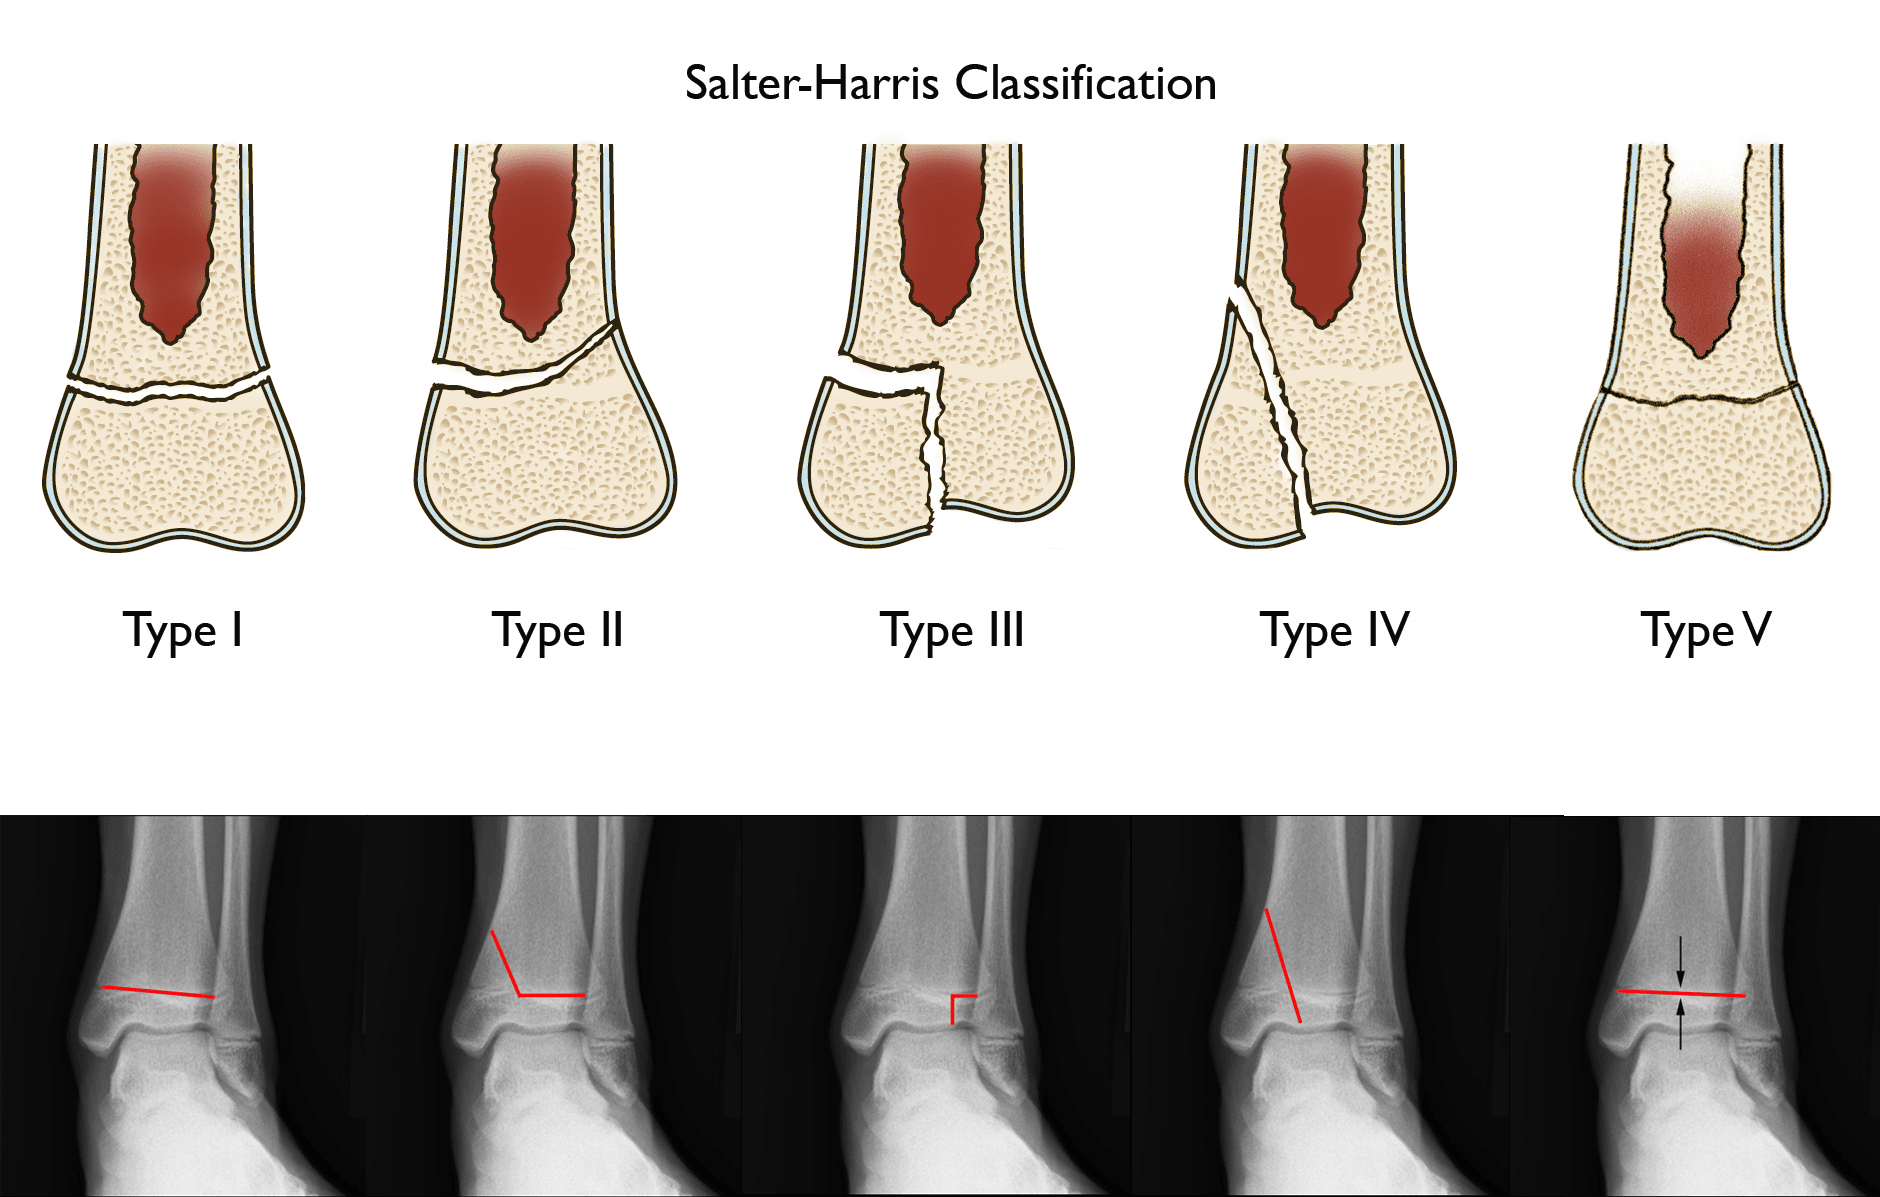 salter-harris growth plate fracture classification